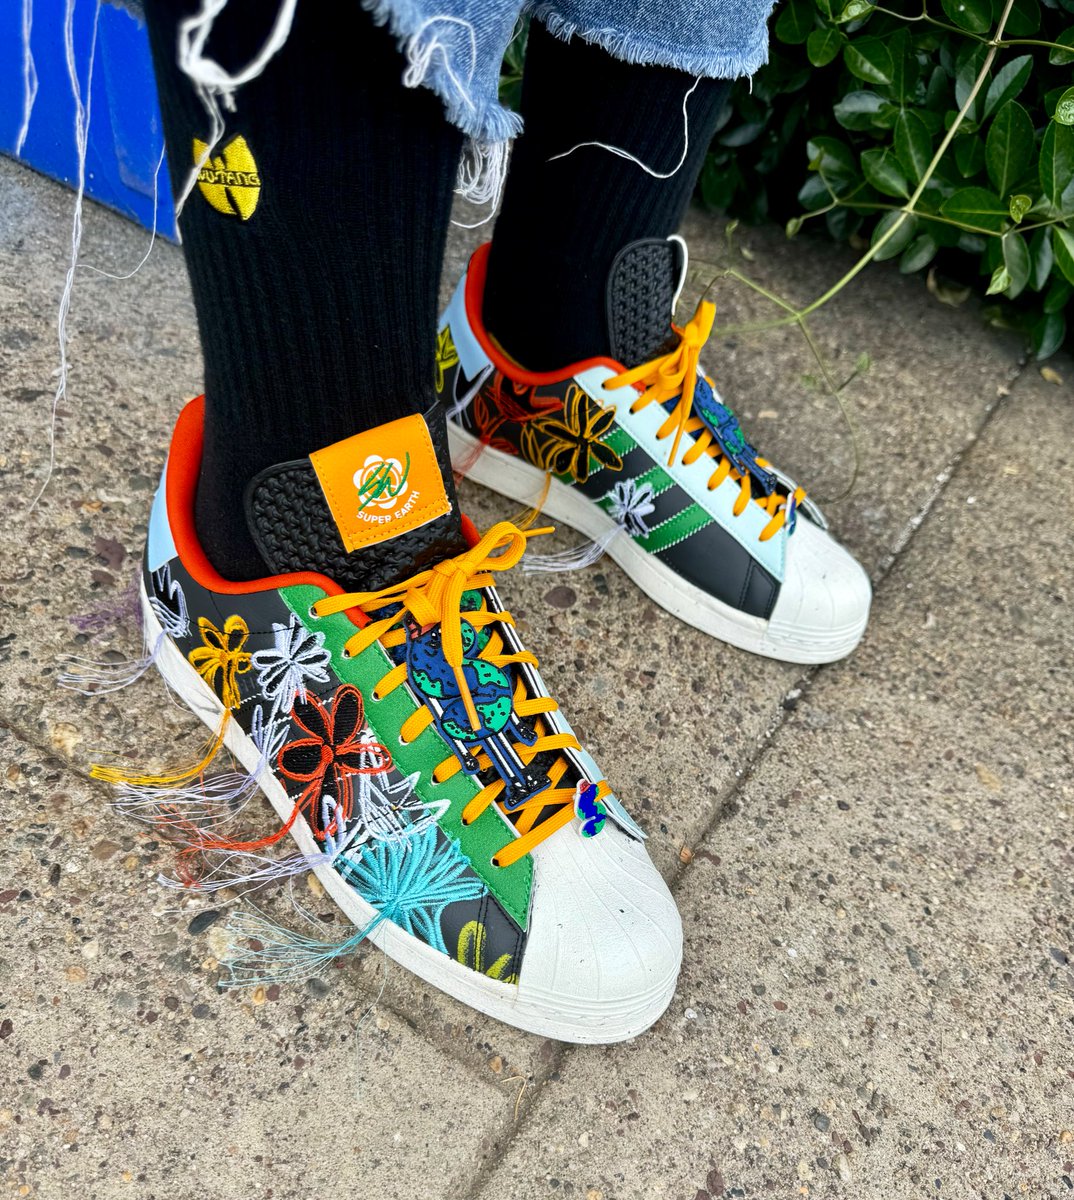 #wuwednesday #sneakers ‘Super Earth’ @seanwotherspoon @adidasUS #mrsock @stance @WuTangClan just my contribution to SNEAKER X FAM